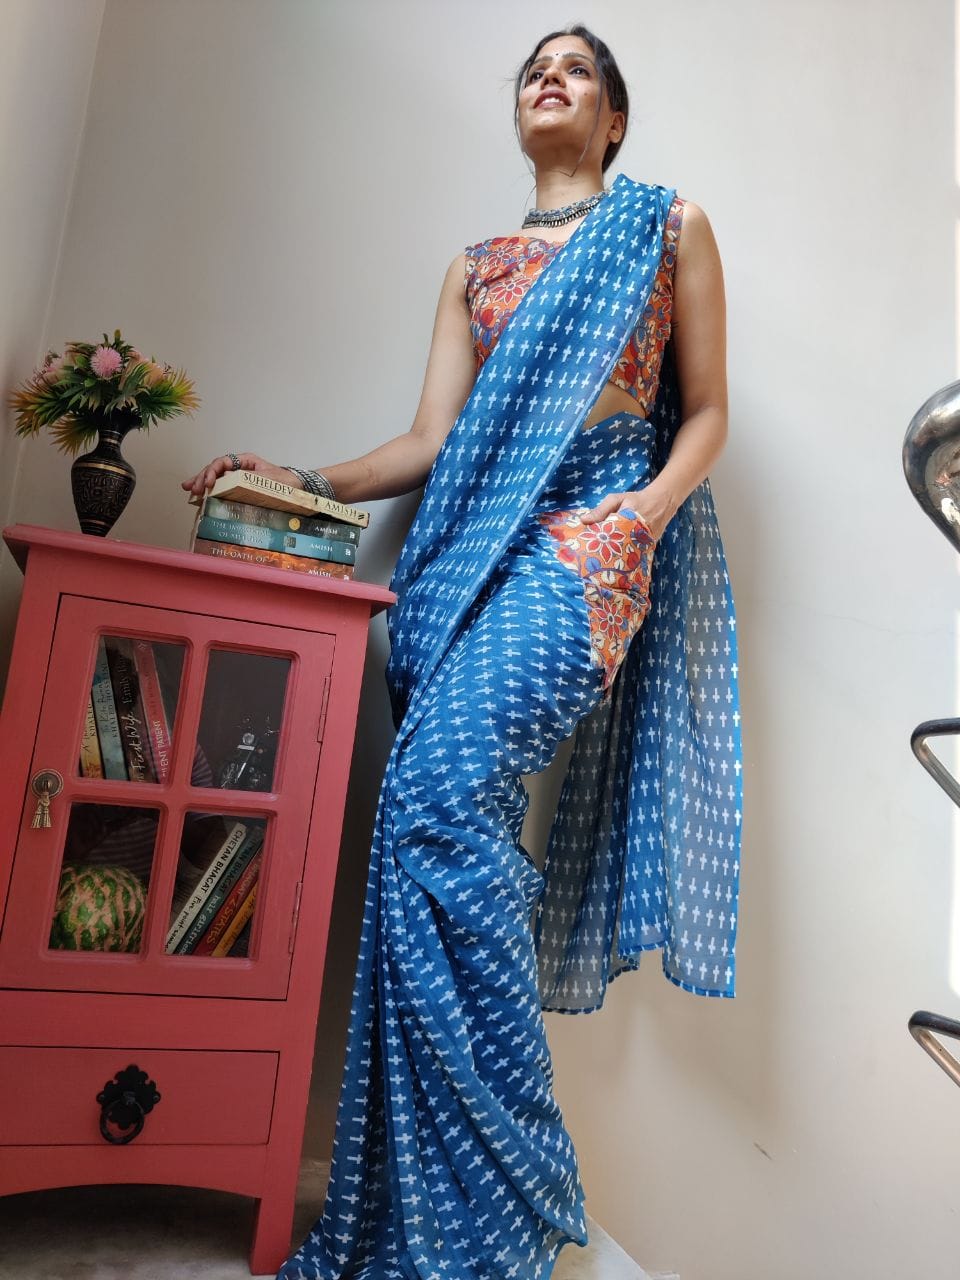 Buy Stitched Saree online at Best Prices in India